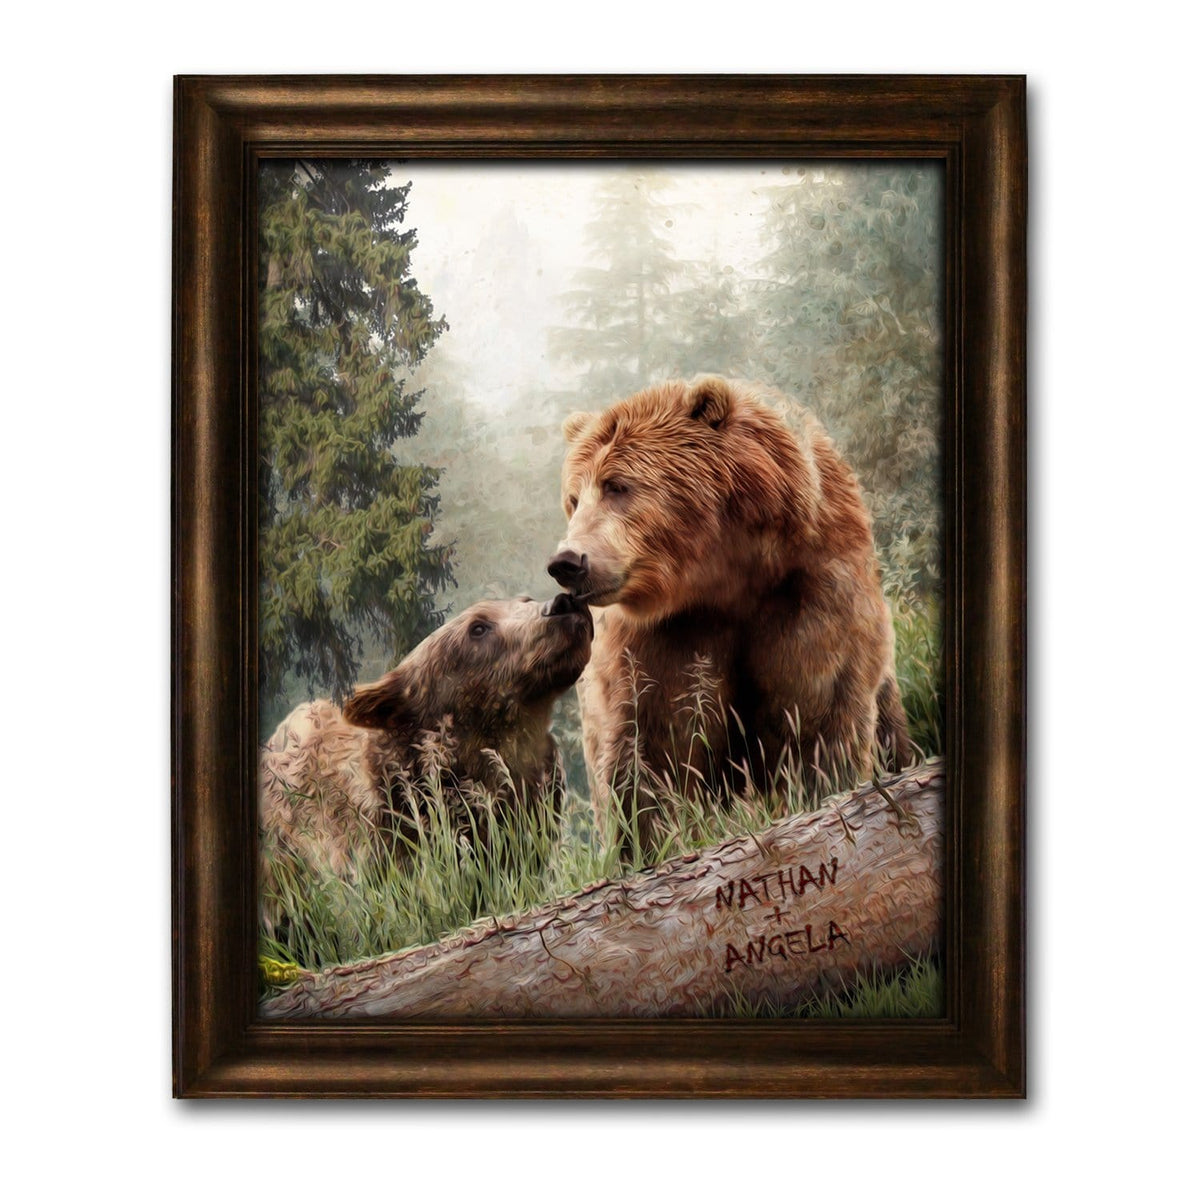 Framed Canvas Nature Wall Art by Personal Prints